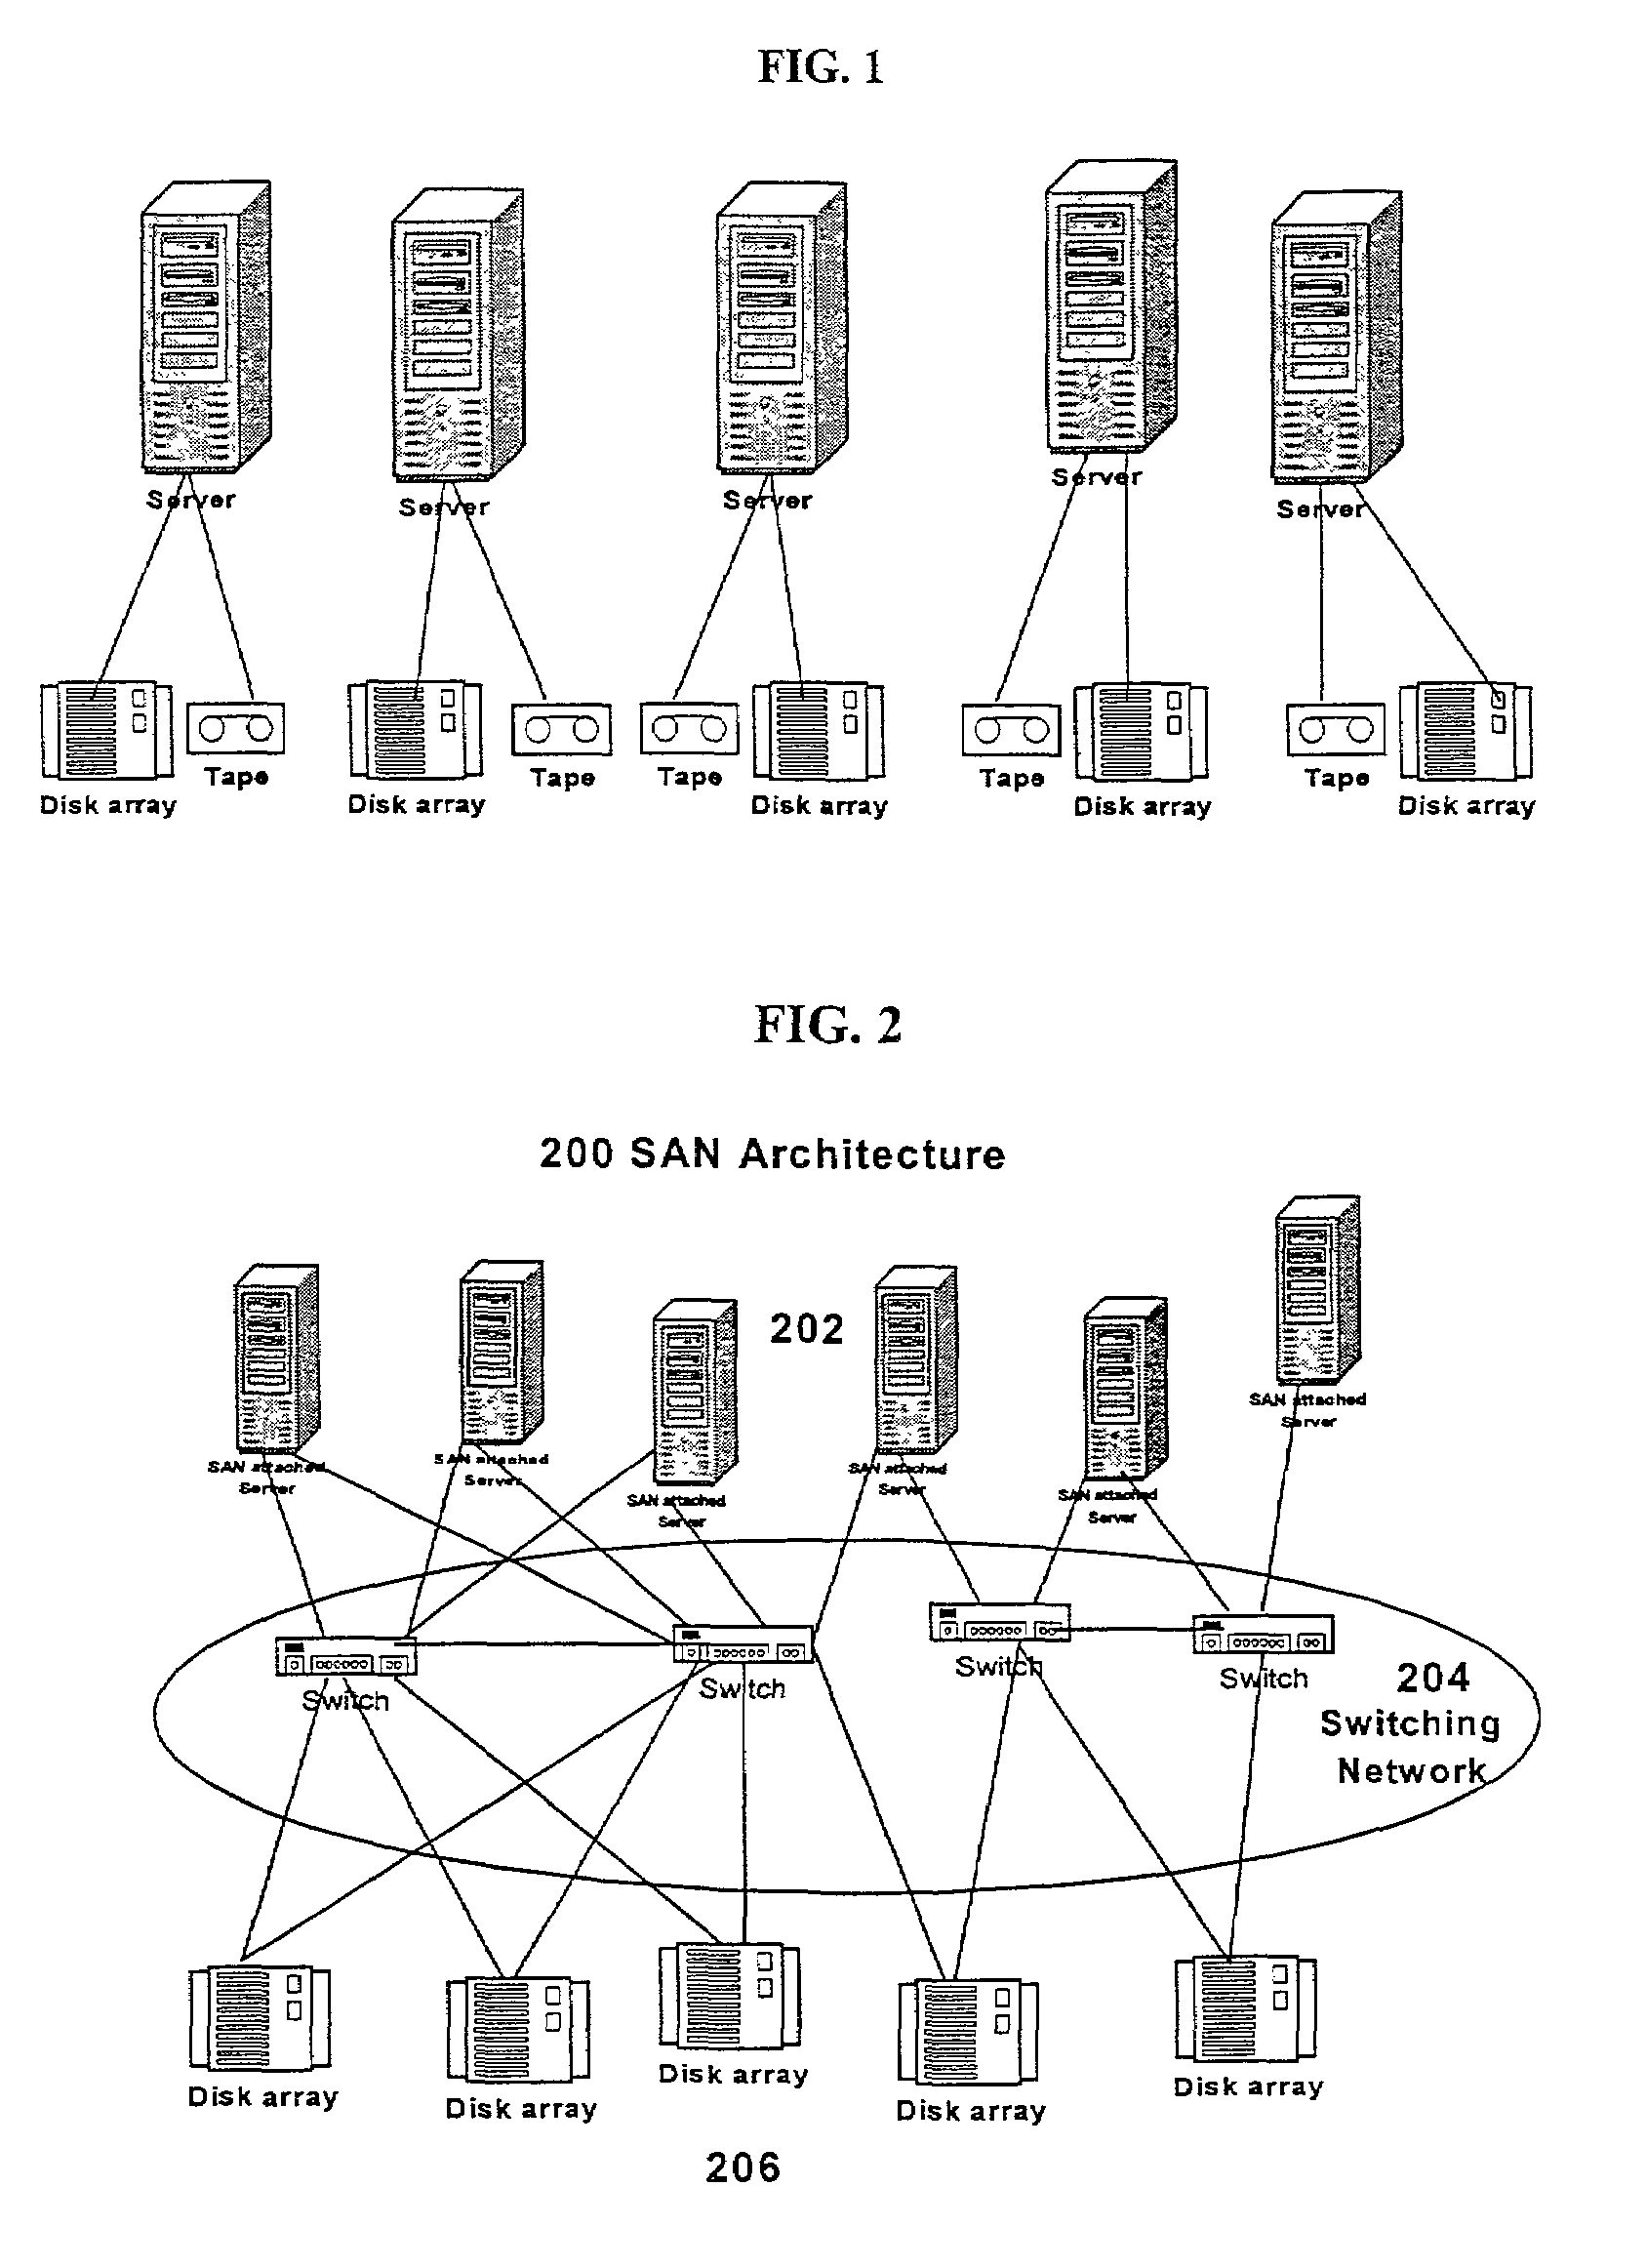 Automated creation of application data paths in storage area networks